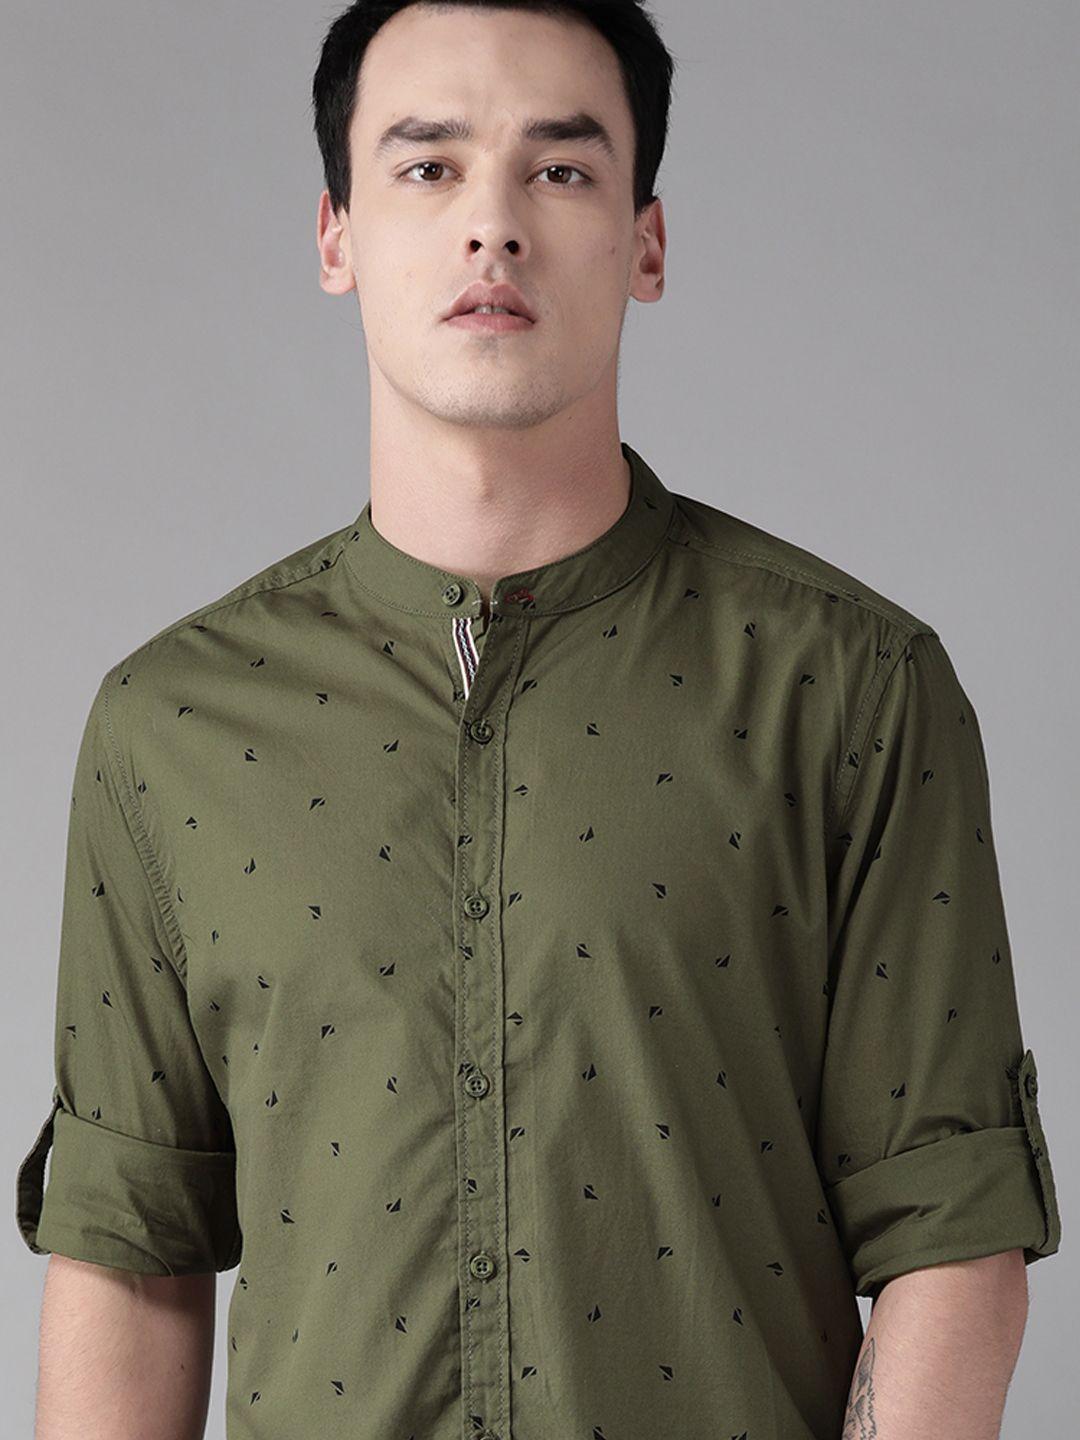 the roadster lifestyle co men olive green & black geometric printed pure cotton casual shirt